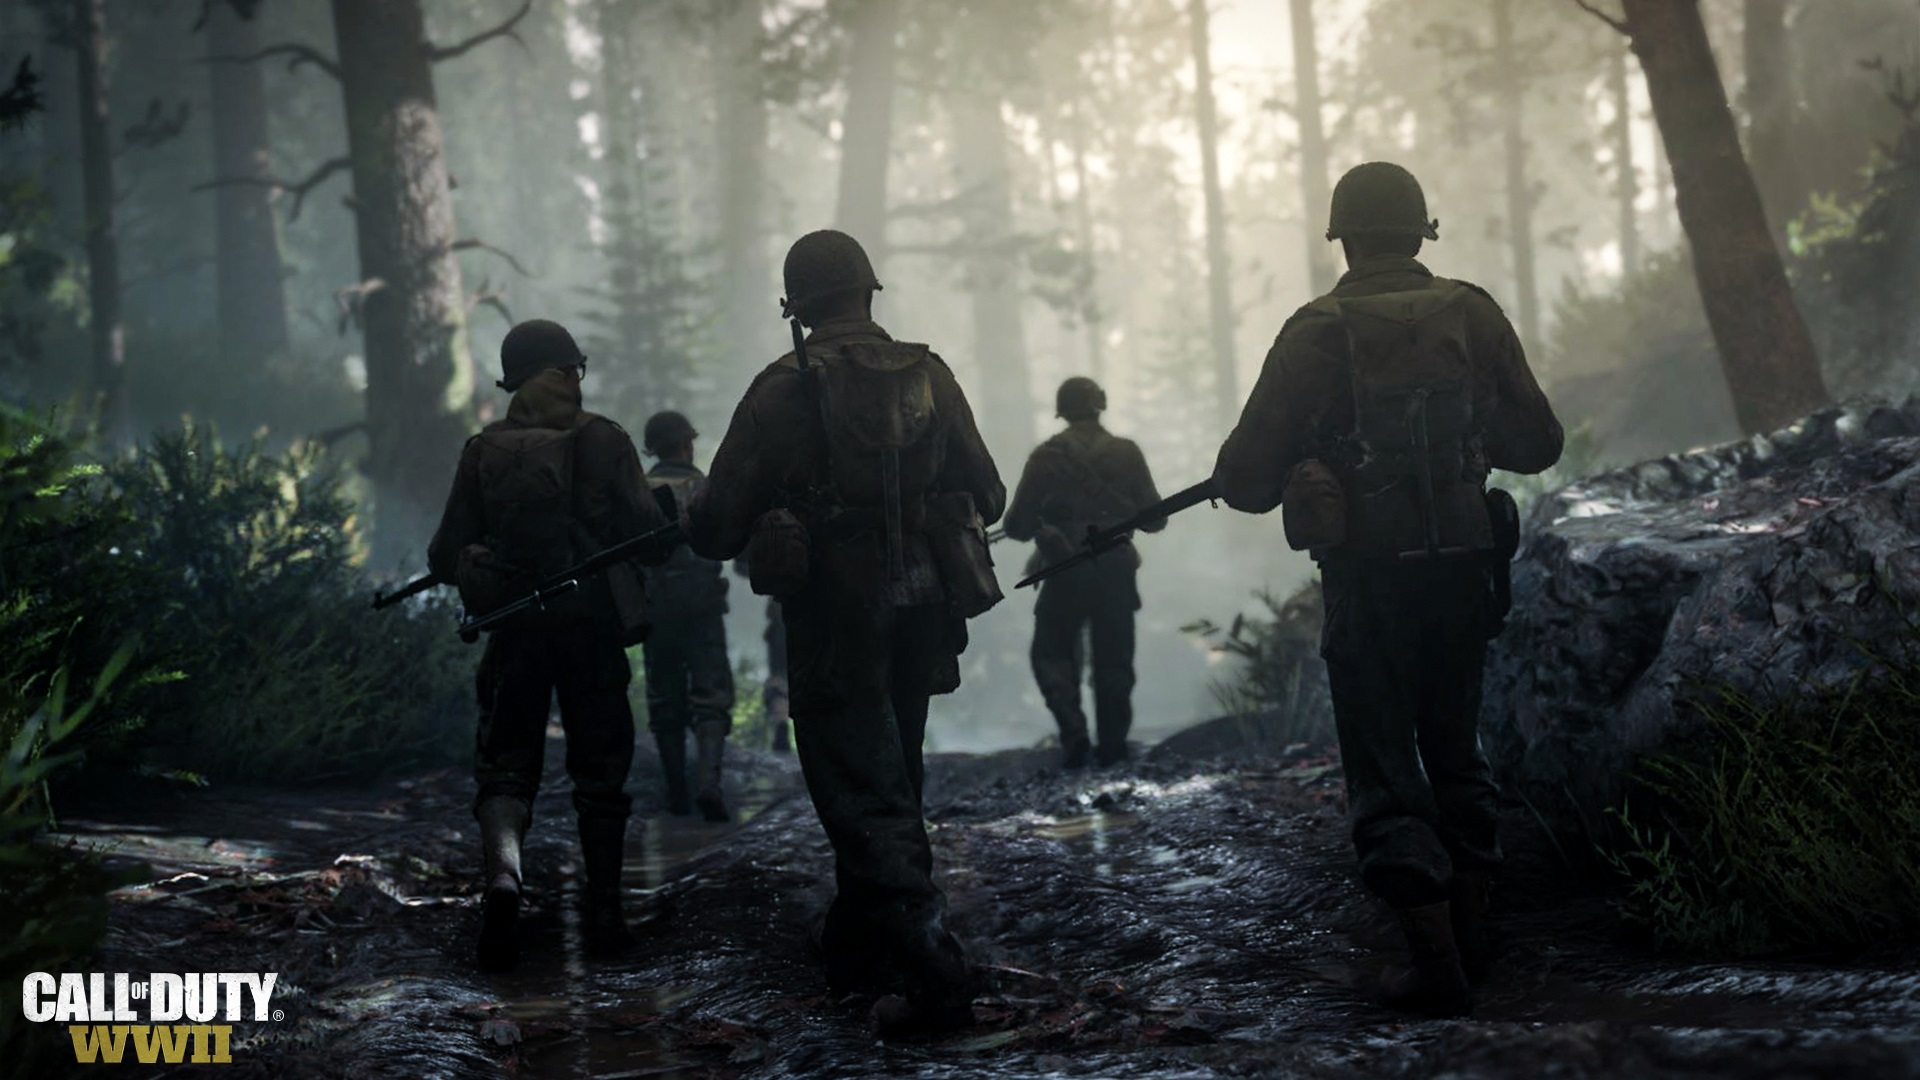 Call of Duty: WWII Launches November 3, First Trailer, Details, More